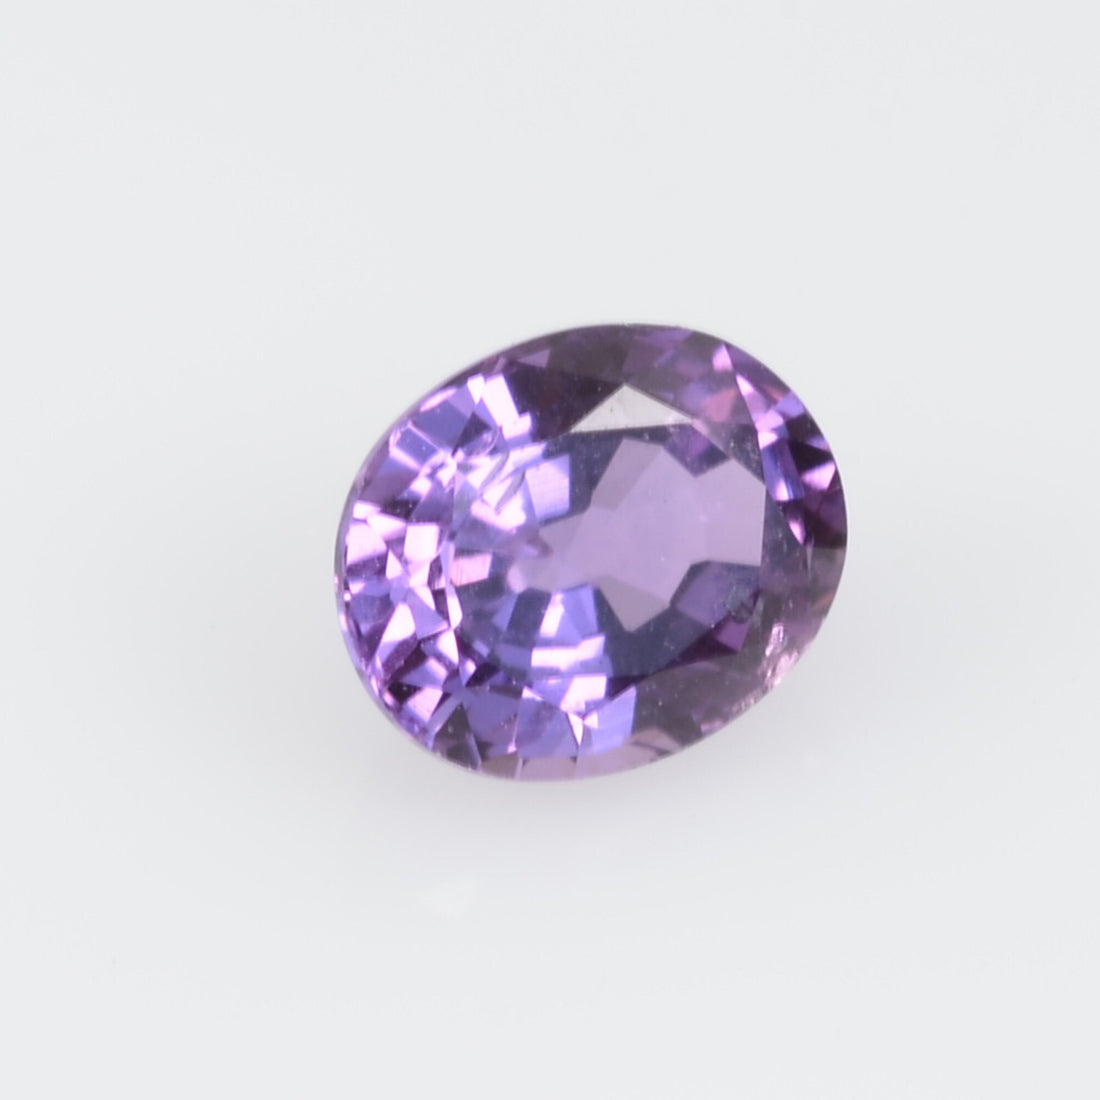 0.84 cts Natural Purple Sapphire Loose Gemstone Oval Cut